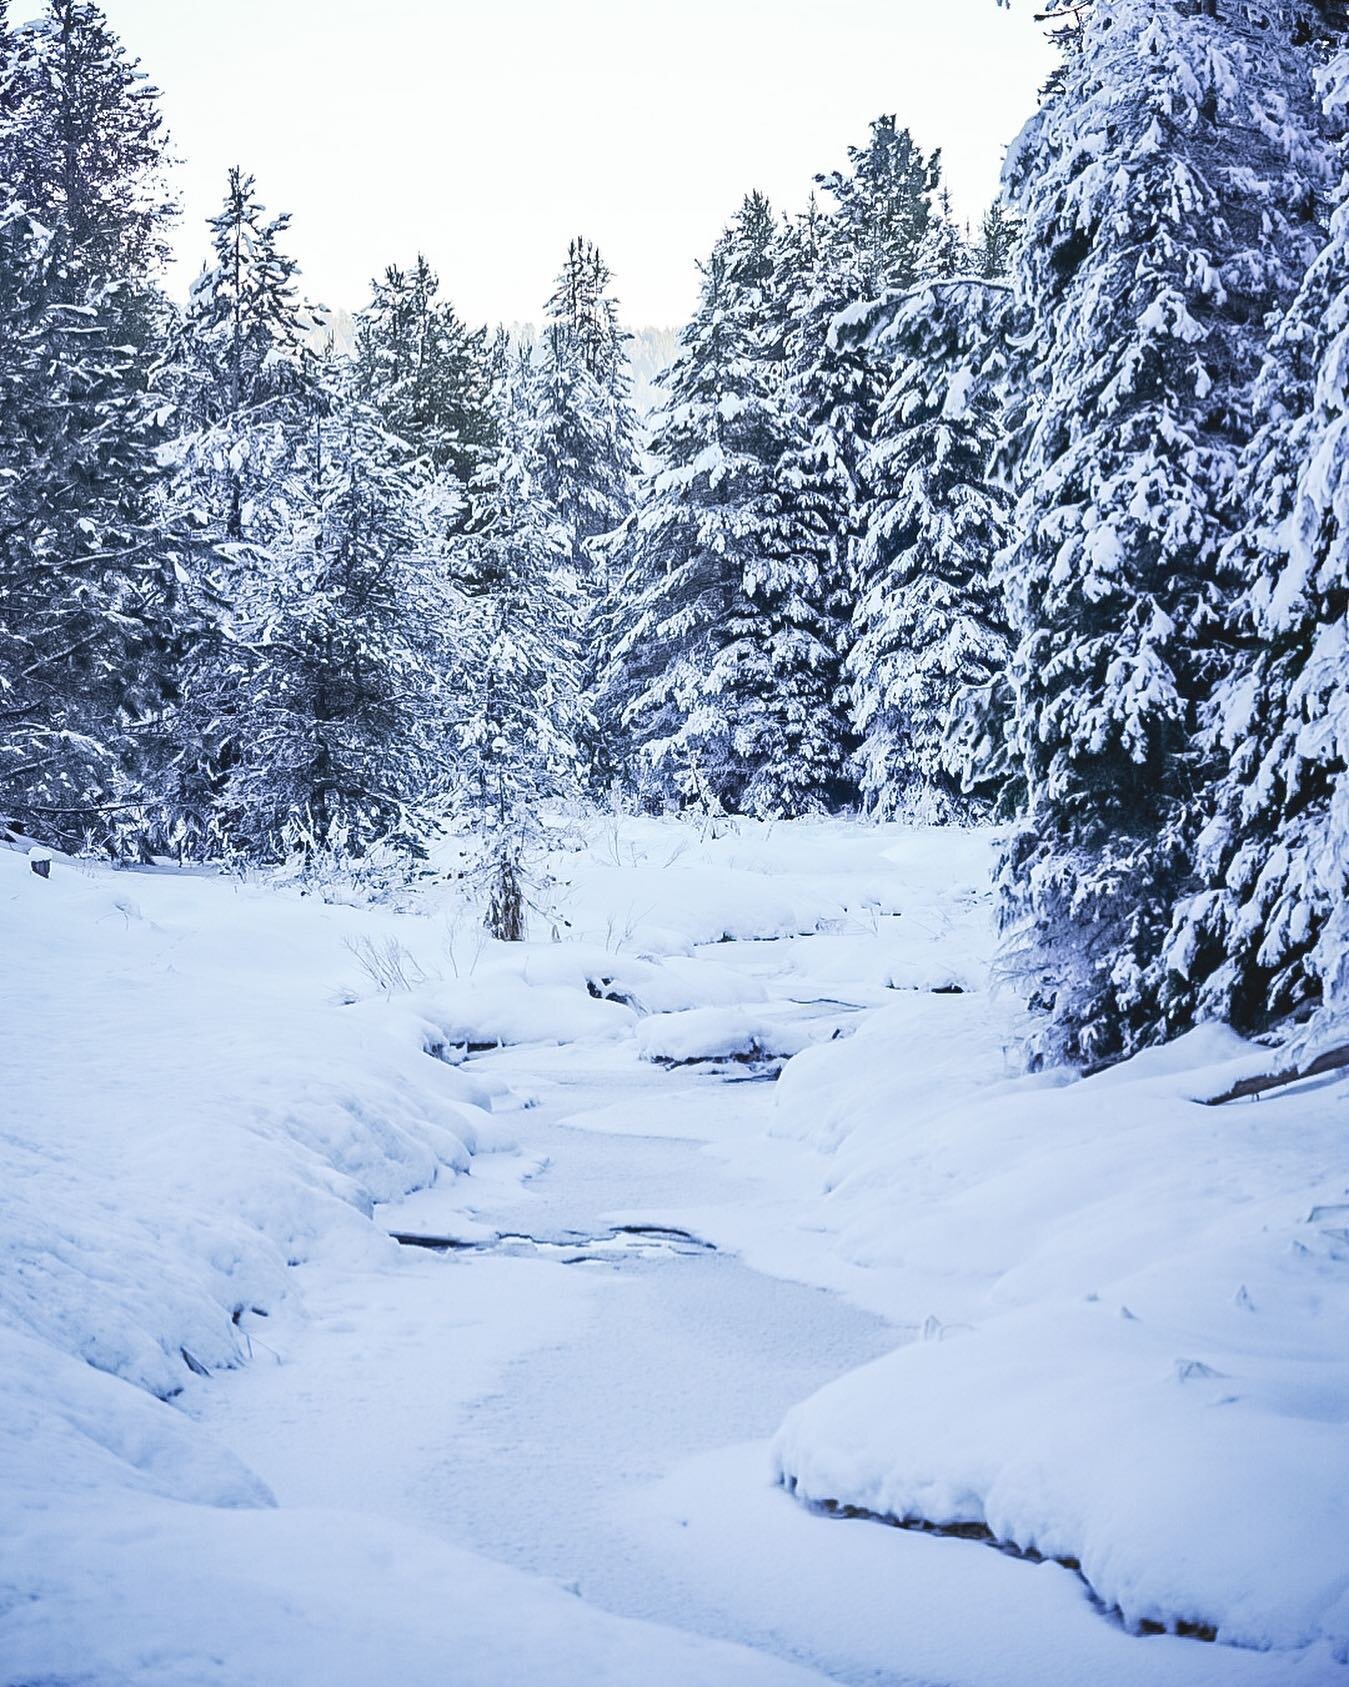 It&rsquo;s beginning to look a lot like (insert your favorite winter sport/activity) time!

Who&rsquo;s coming up to the McCall area soon and what are your plans?

#winterwonderland #idahowinter #snowsnowsnowsnow #getoutside #getoutsideidaho #pnwonde